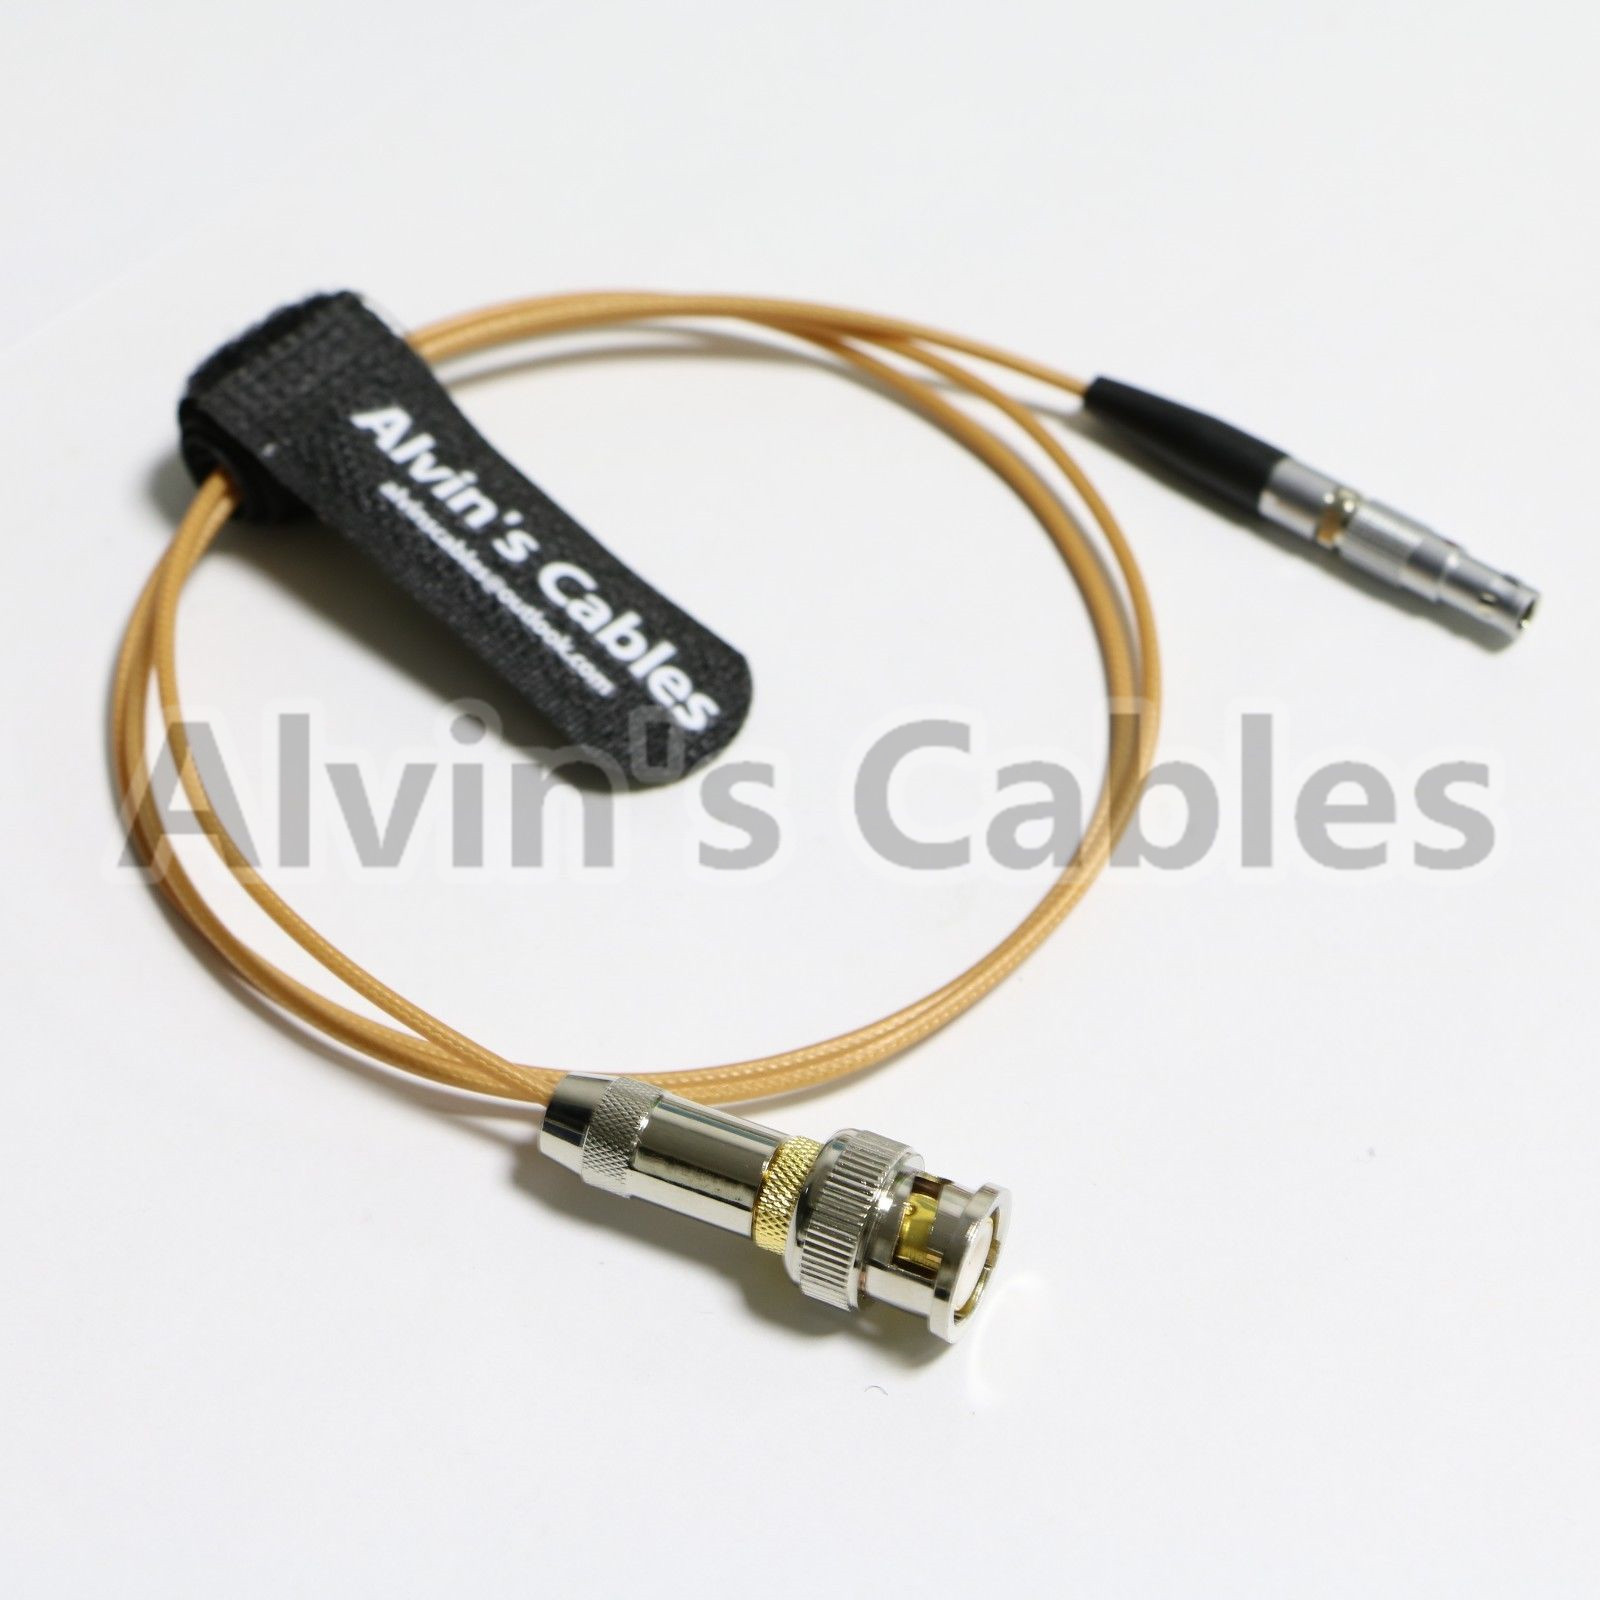 Alvin's Cables Time Code Adapter Cable for Red Epic Scarlet BNC Plug to